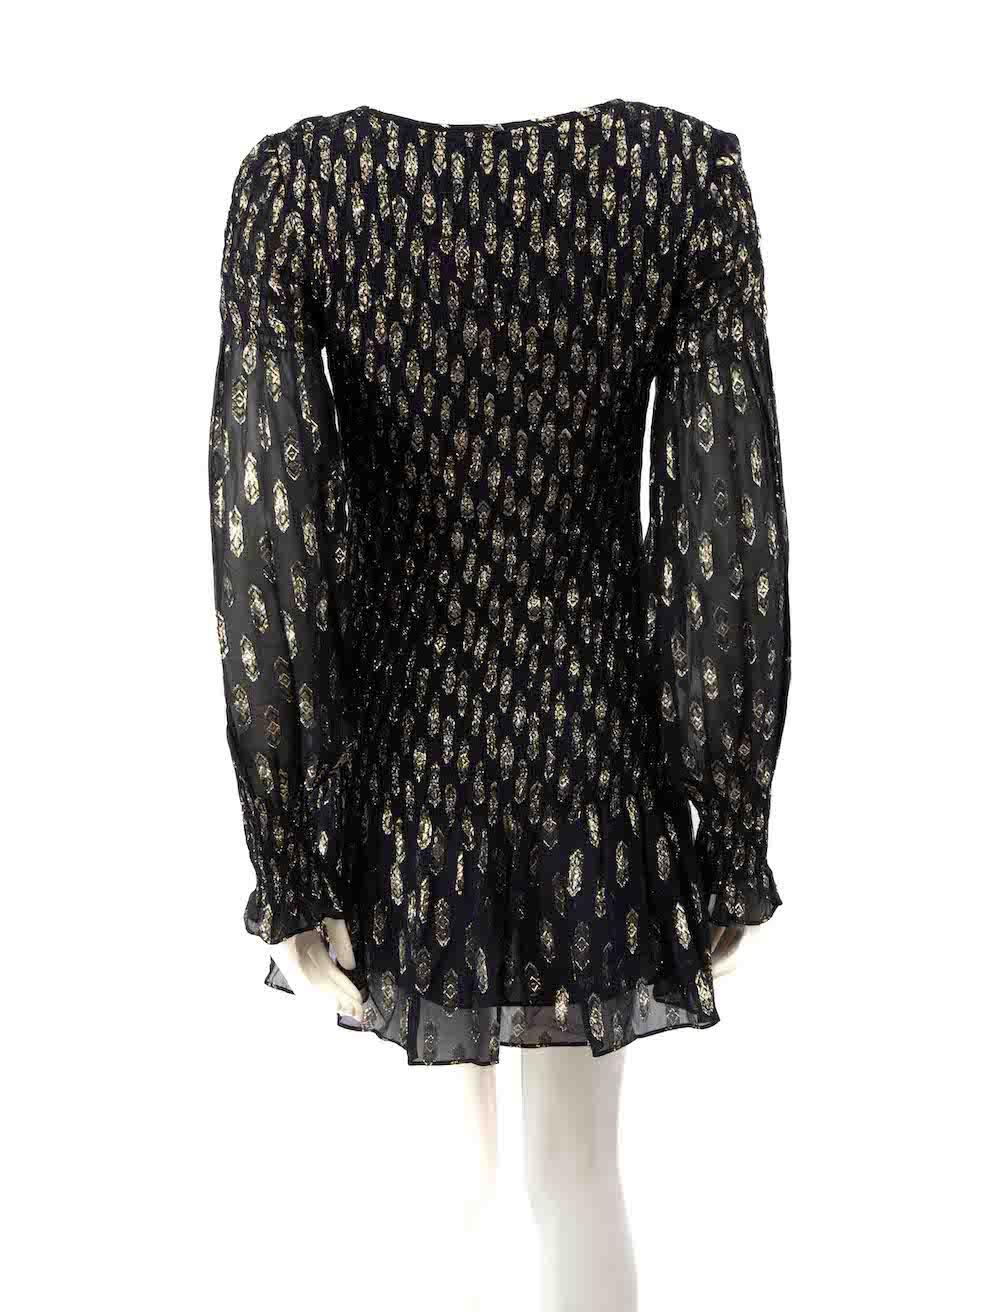 LoveShackFancy Navy Metallic Jacquard Mini Dress Size S In Excellent Condition For Sale In London, GB